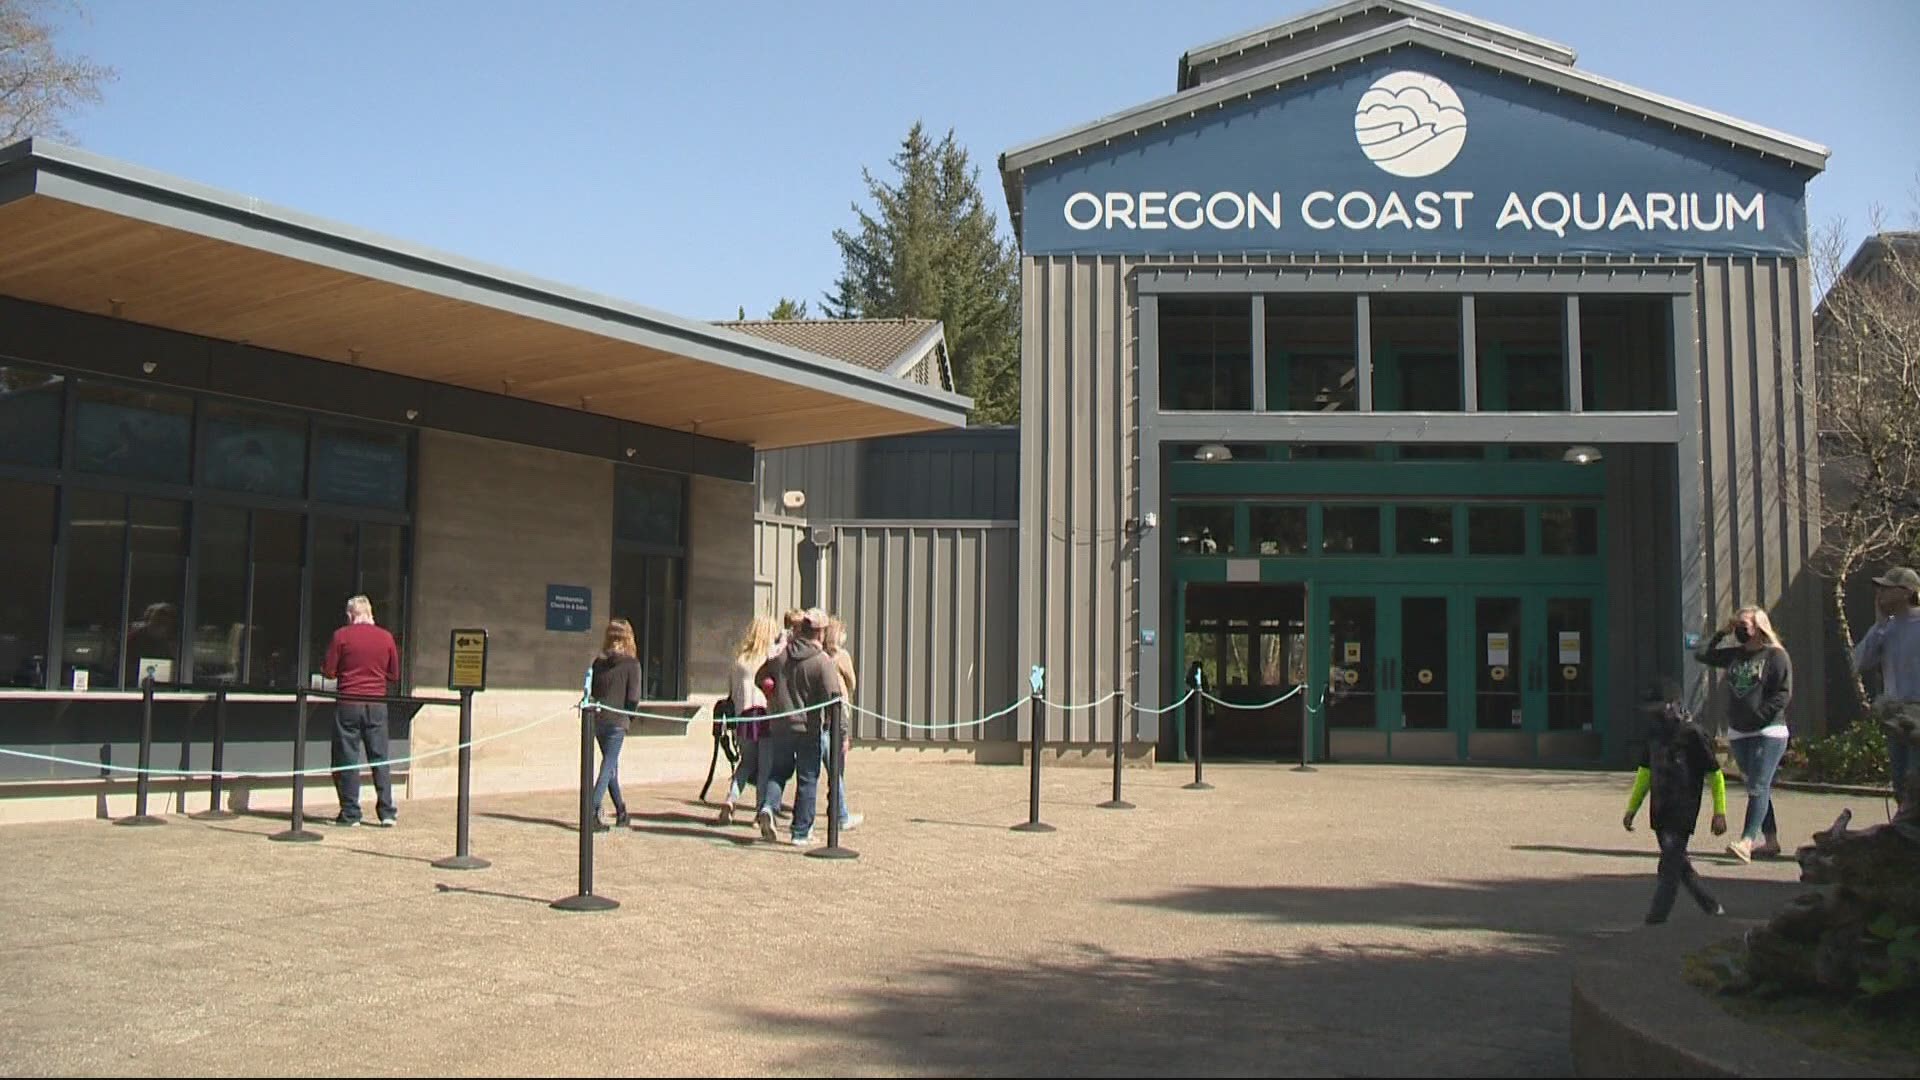 Before you visit the Oregon Coast Aquarium, there’s some info you need to know. Jon Goodwin shows us some of the measures keeping guests safe.